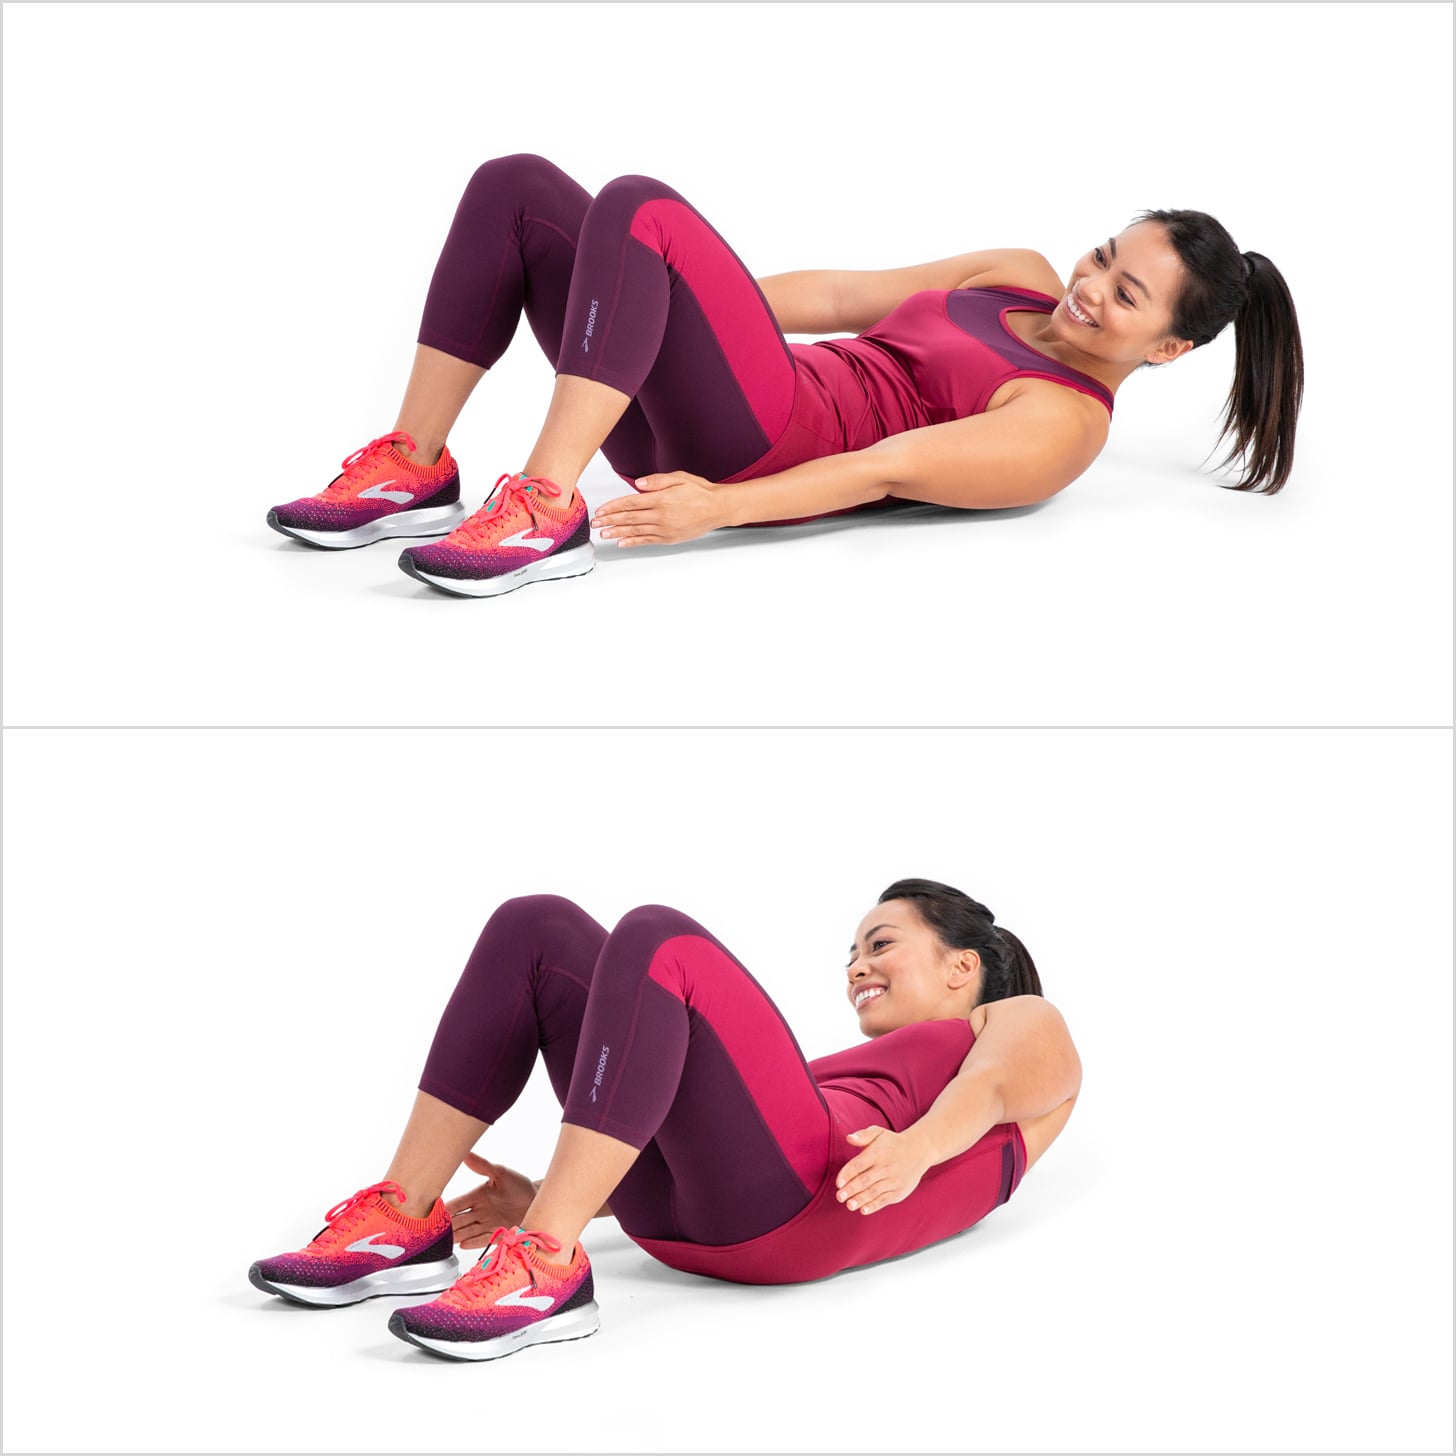 5 Waist Clinching Exercises To Sculpt Sexy Side Abs And Create Stunning Obliques Shreddedfit